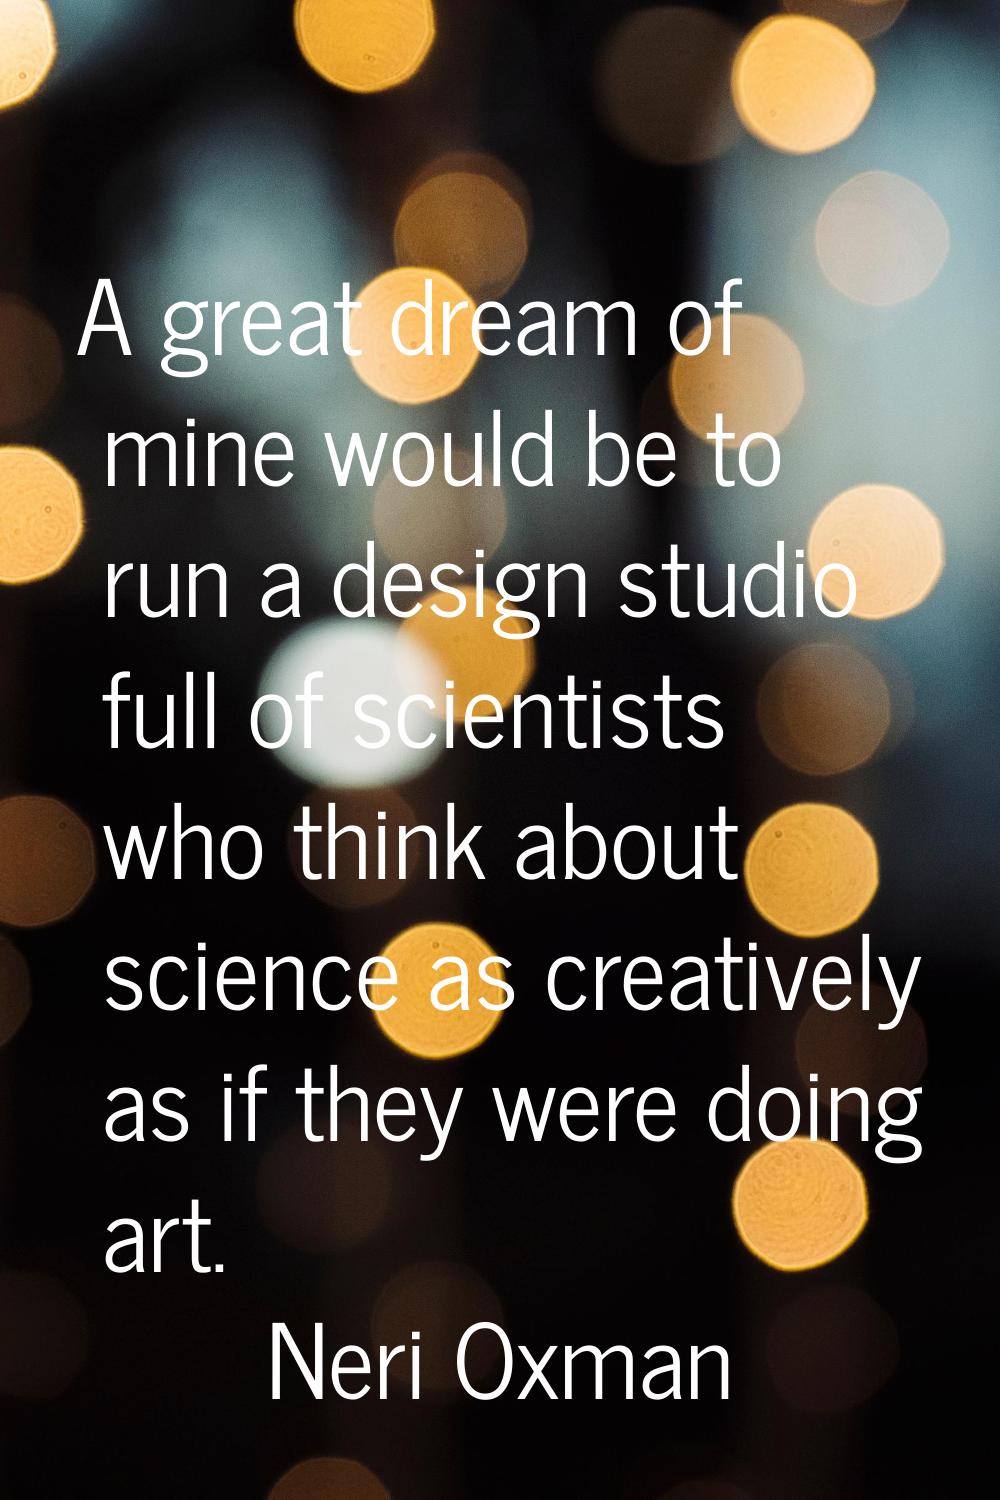 A great dream of mine would be to run a design studio full of scientists who think about science as